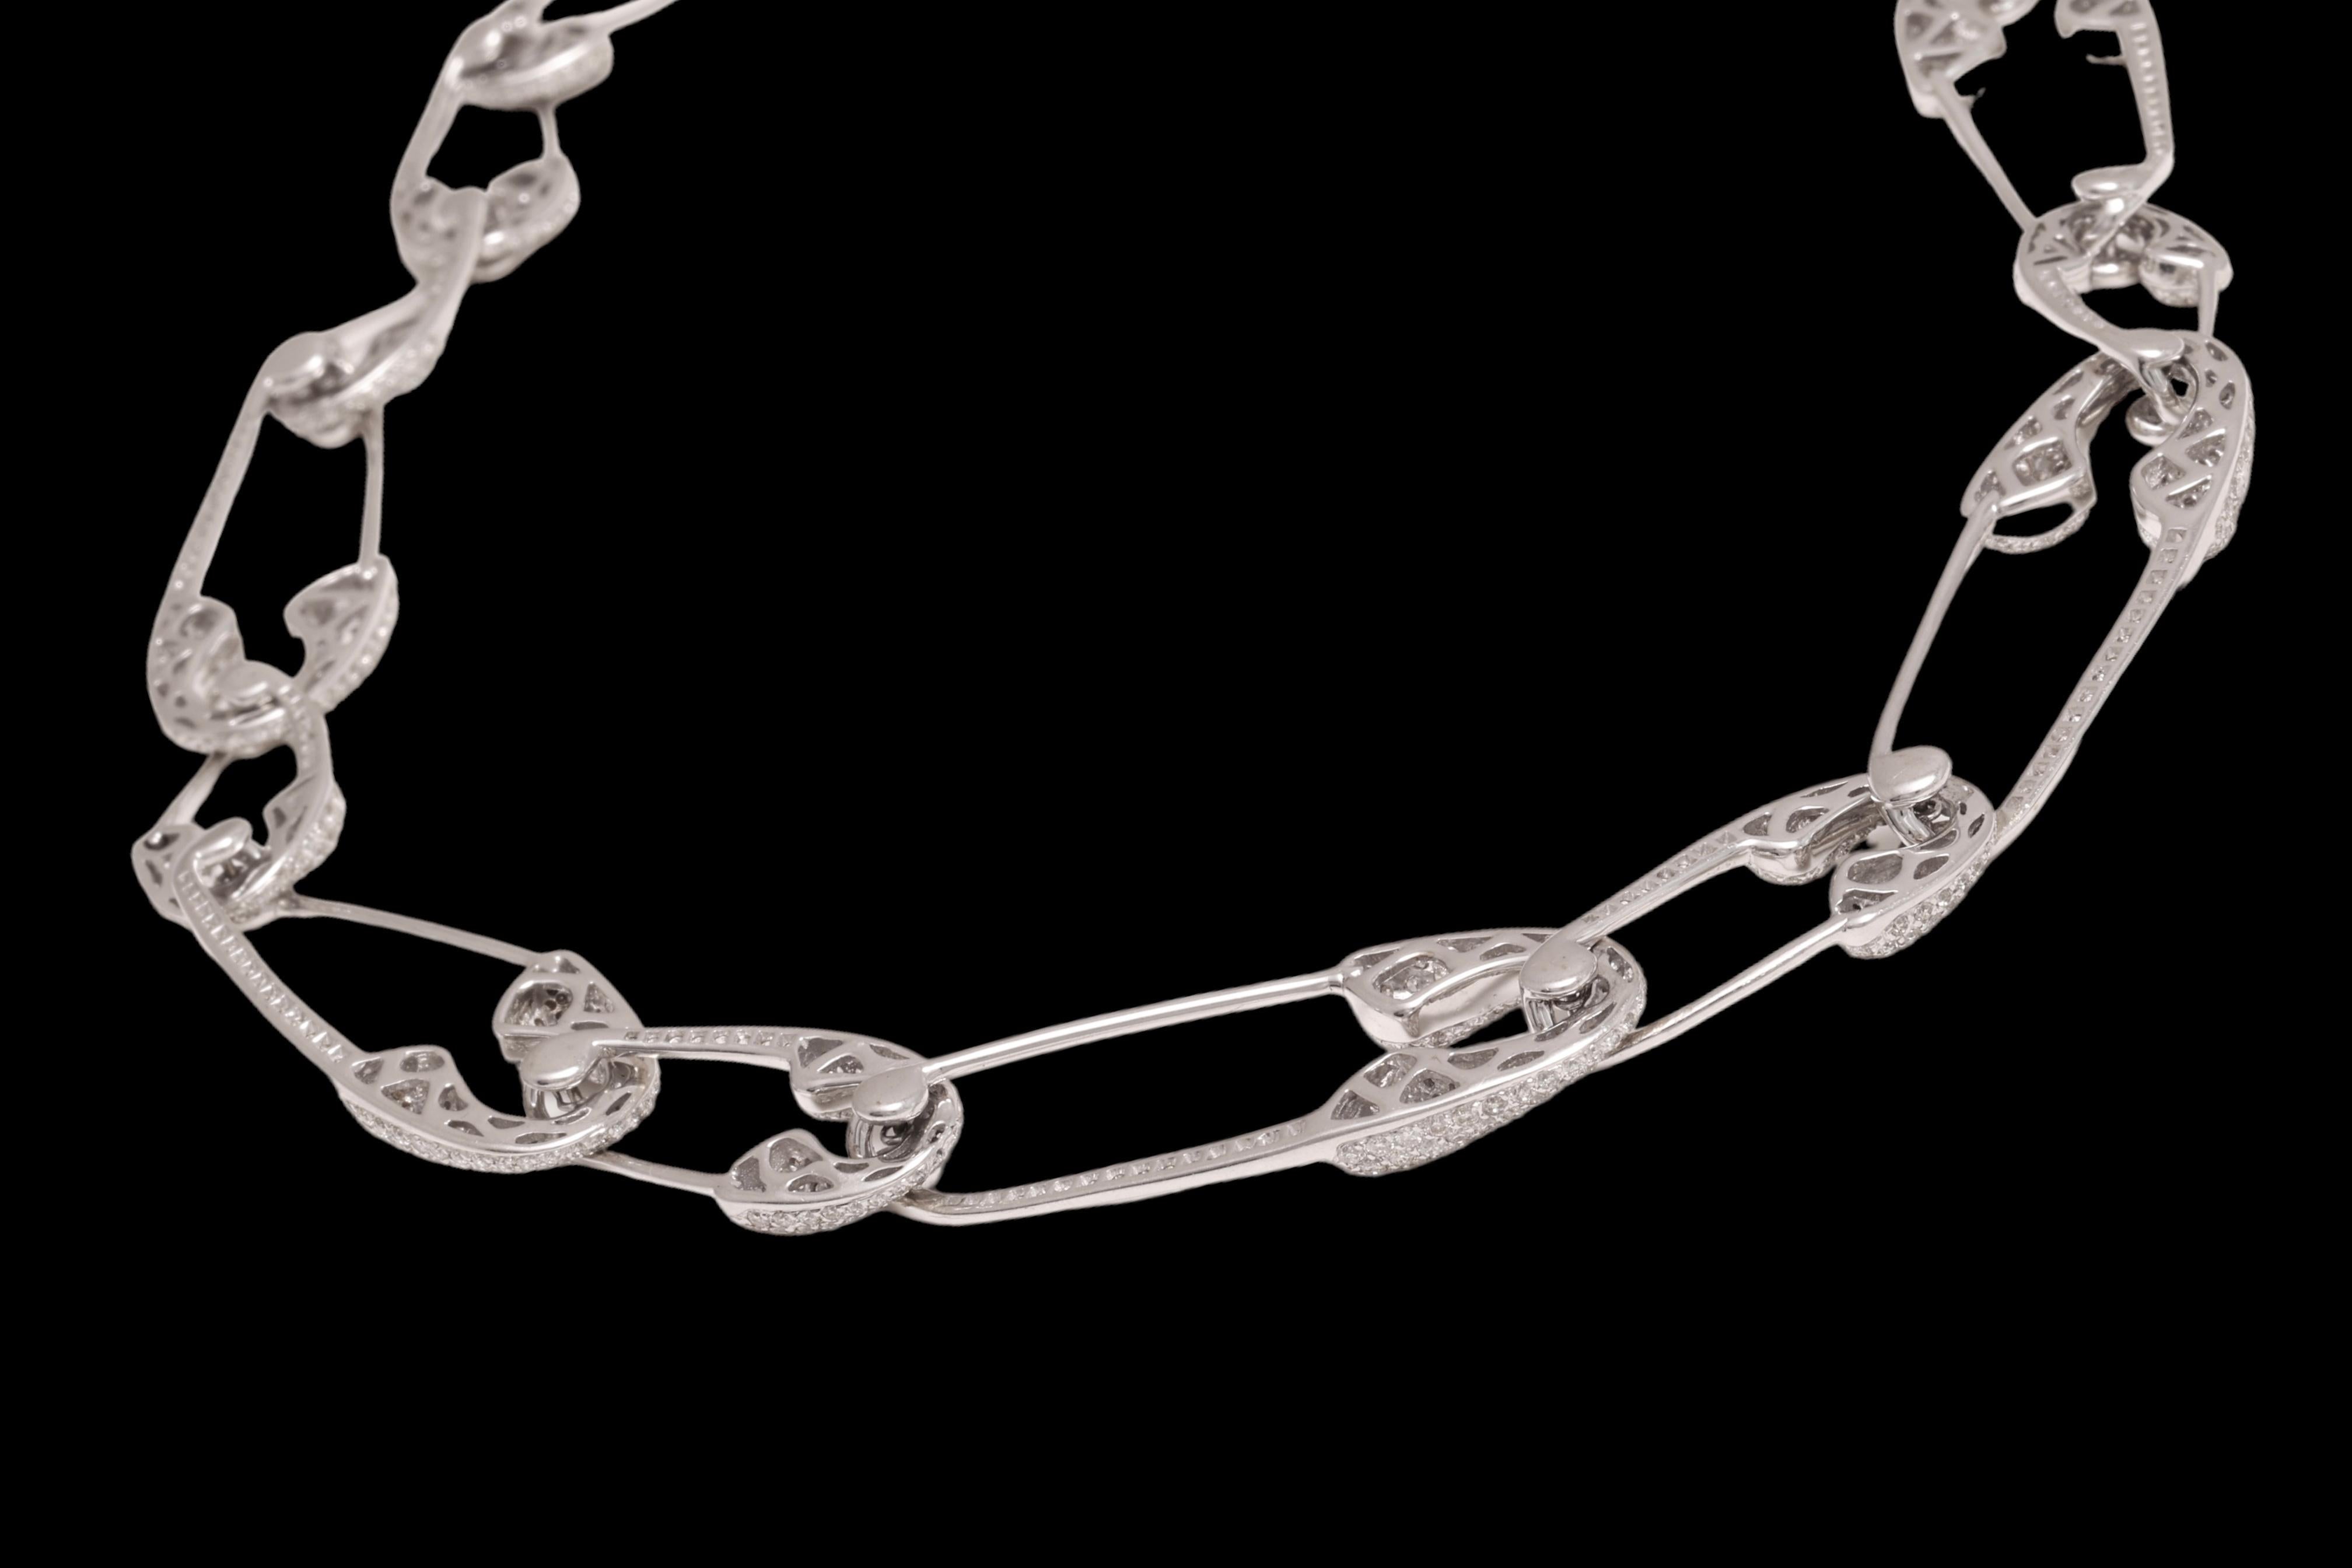 Fabulous 18 kt. White Gold Interlocking Safety Pin Necklace With 5.6ct. Diamonds For Sale 1